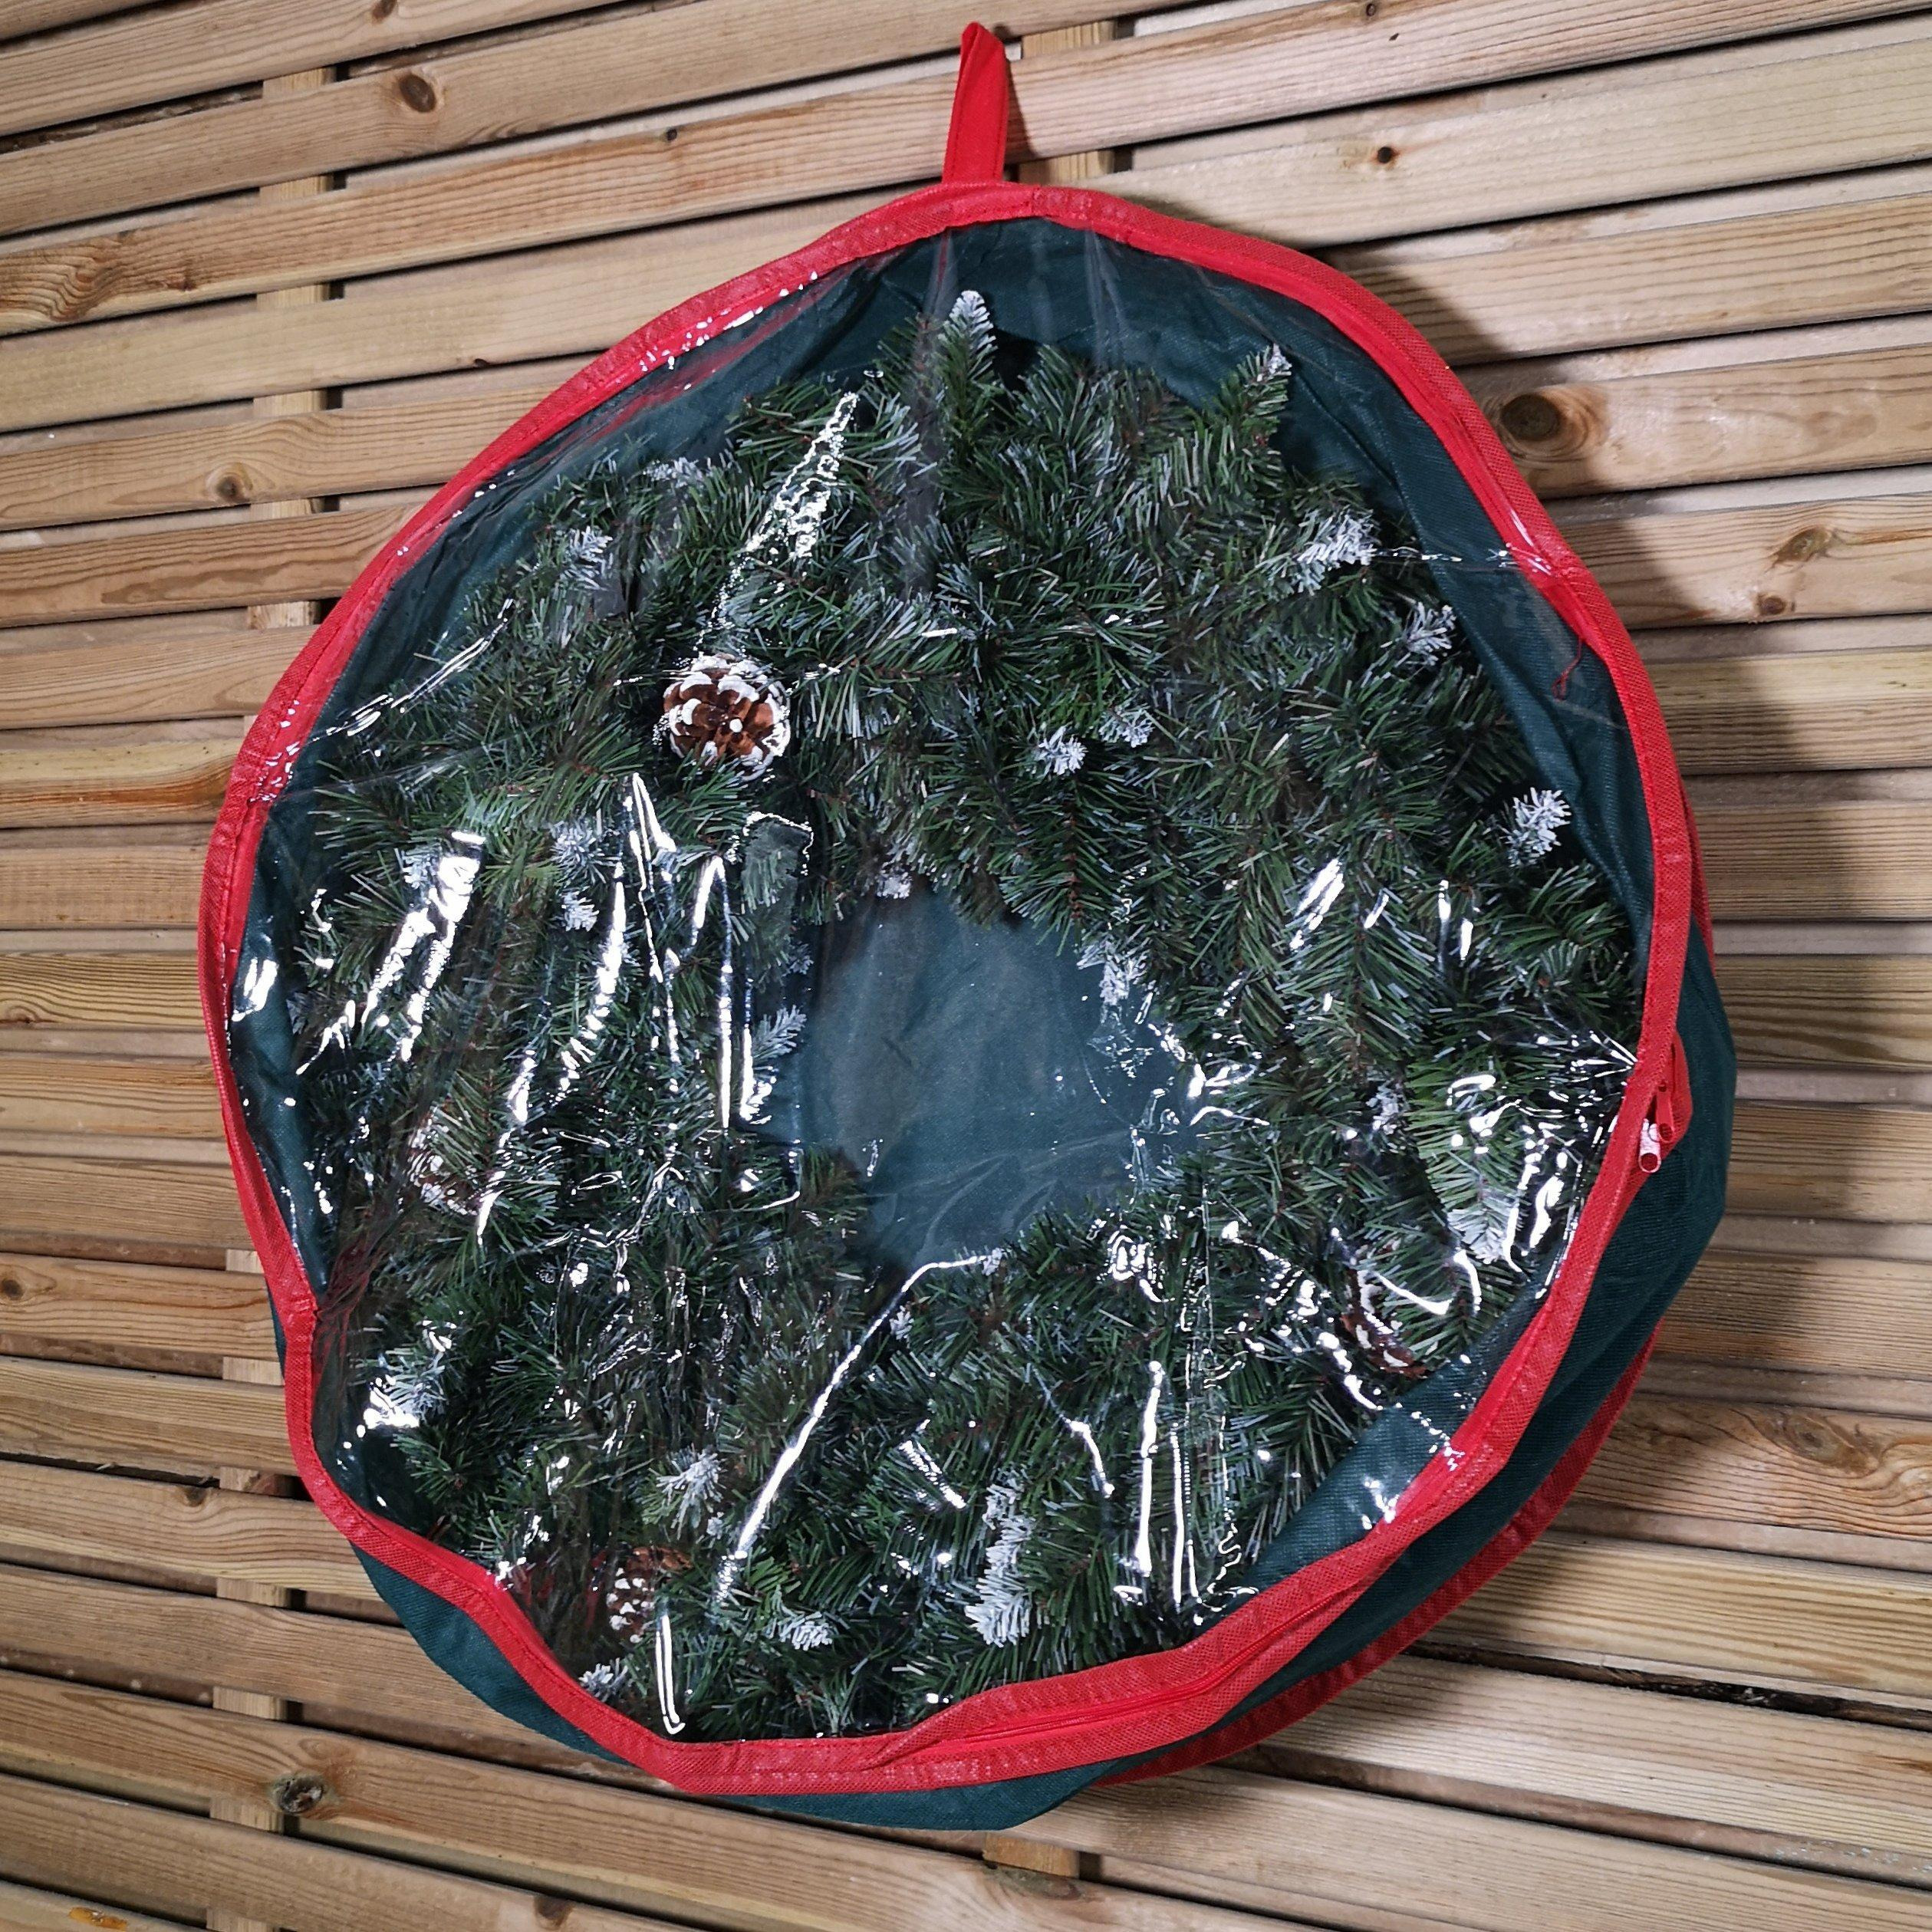 65cm Green Christmas Wreath Decoration Storage Bag with Zip and Carry Handle - image 1